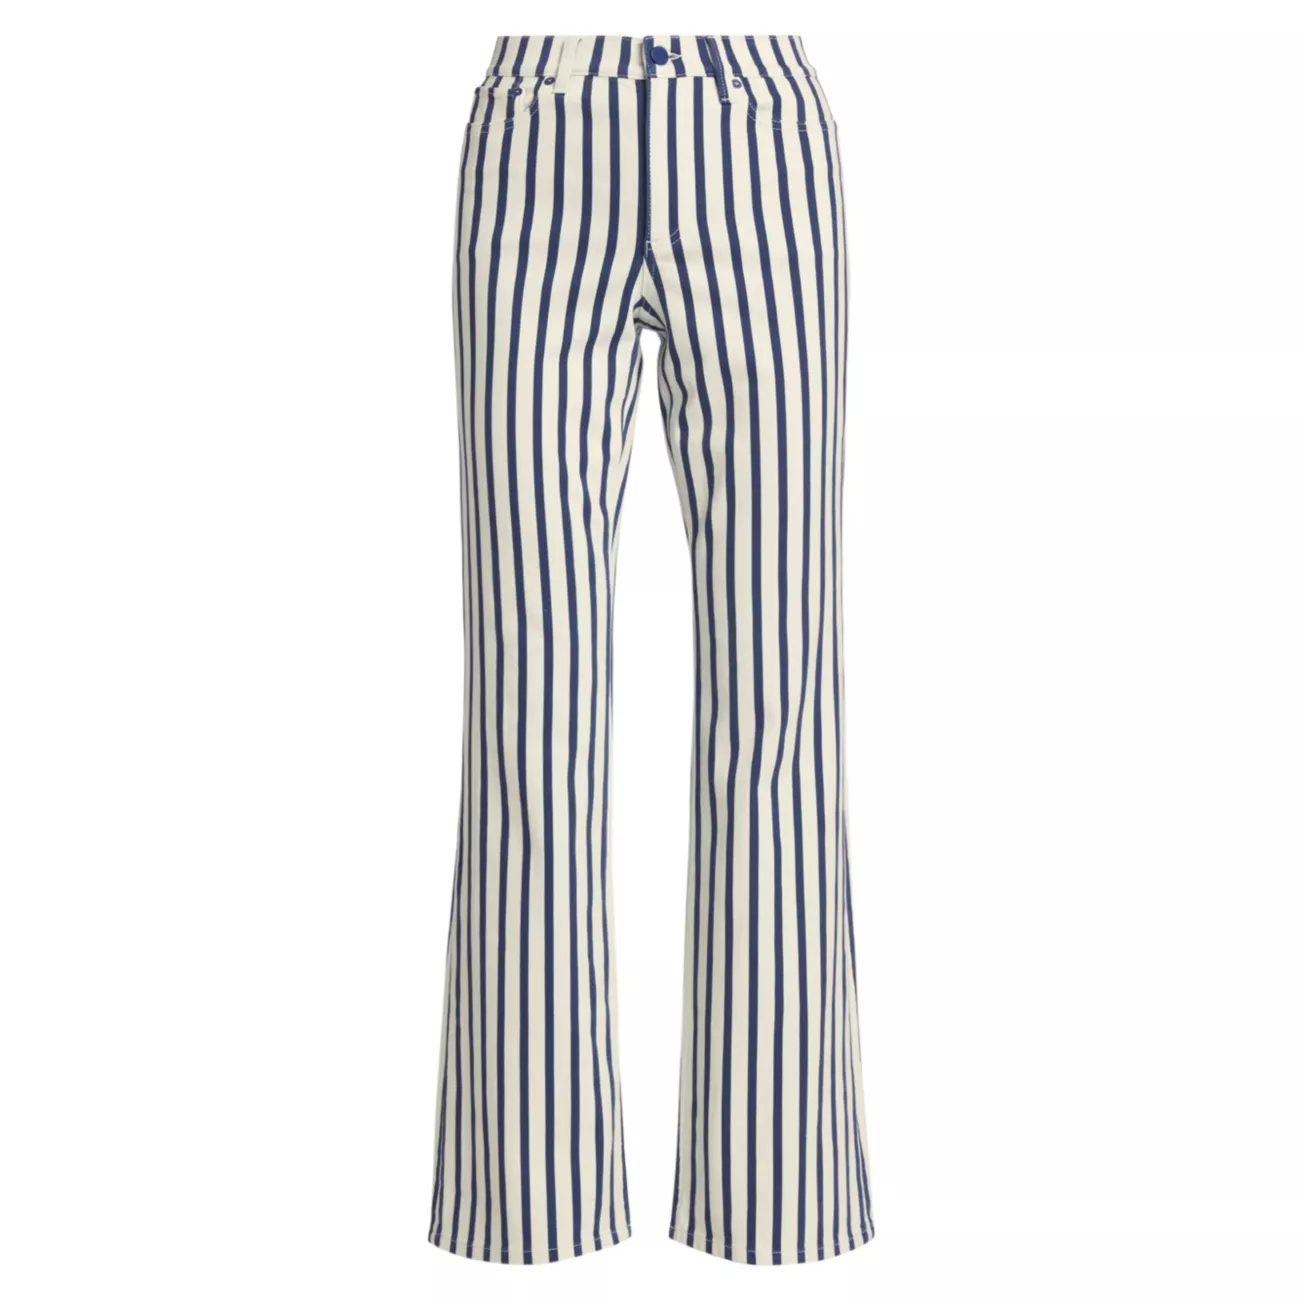 Keira Mid-Rise Striped Stretch Boot-Cut Jeans Alice + Olivia